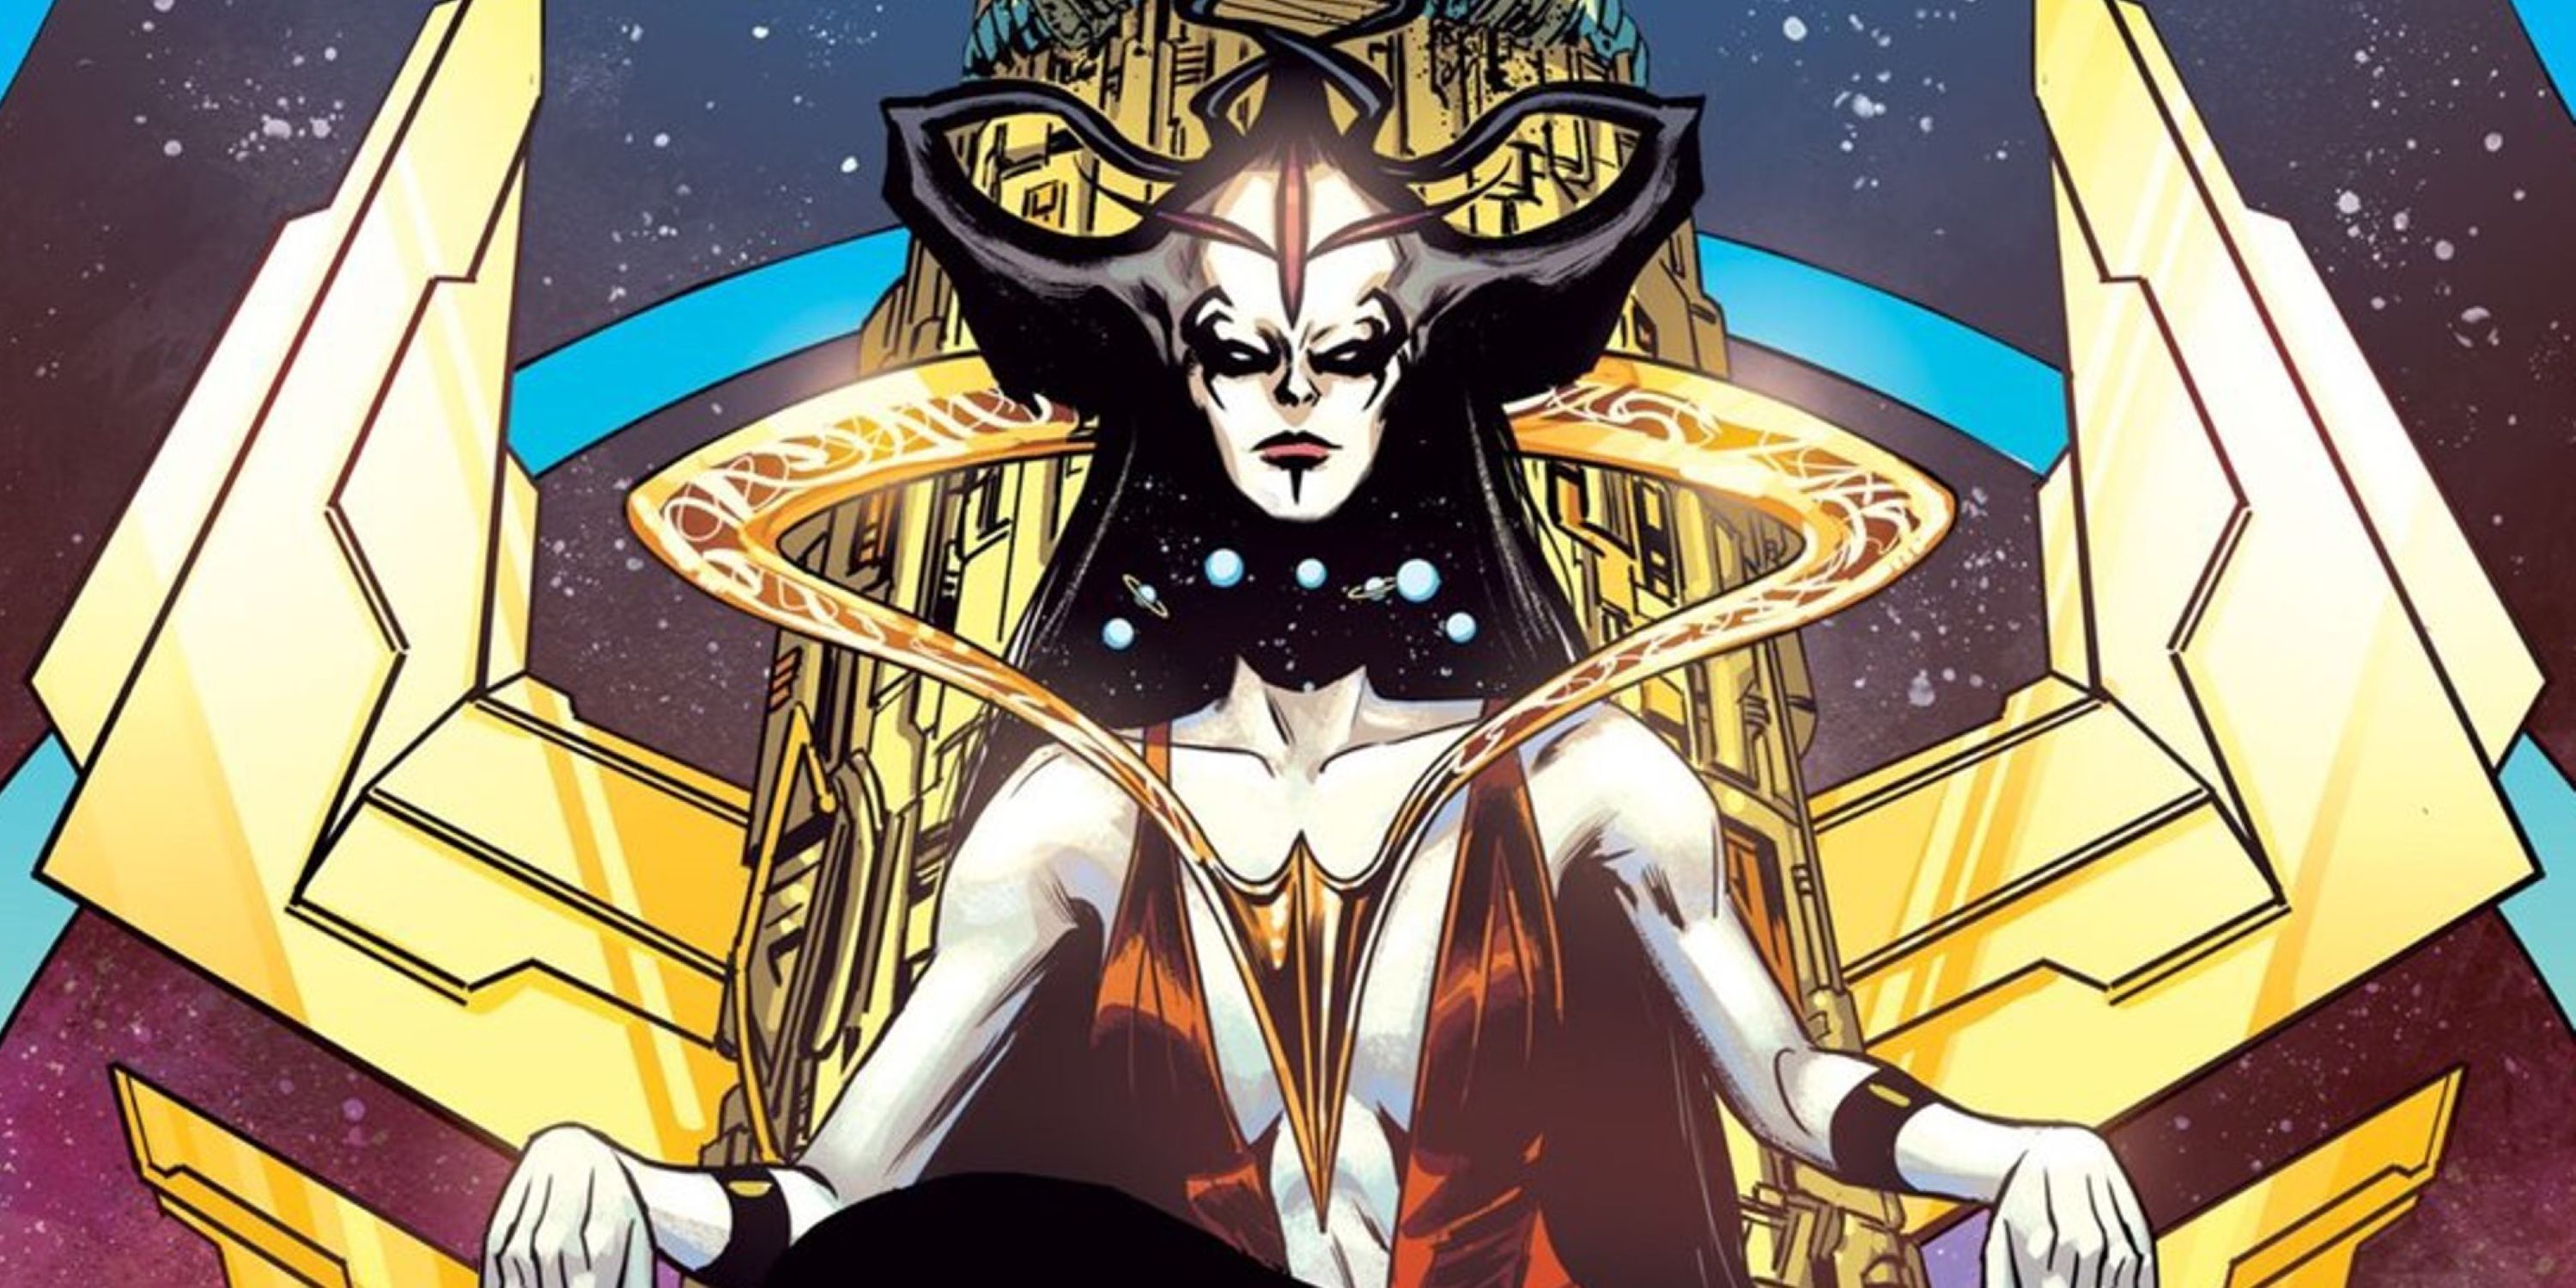 Perpetua wears her twisted crown and sits on her celestial throne in DC Comics